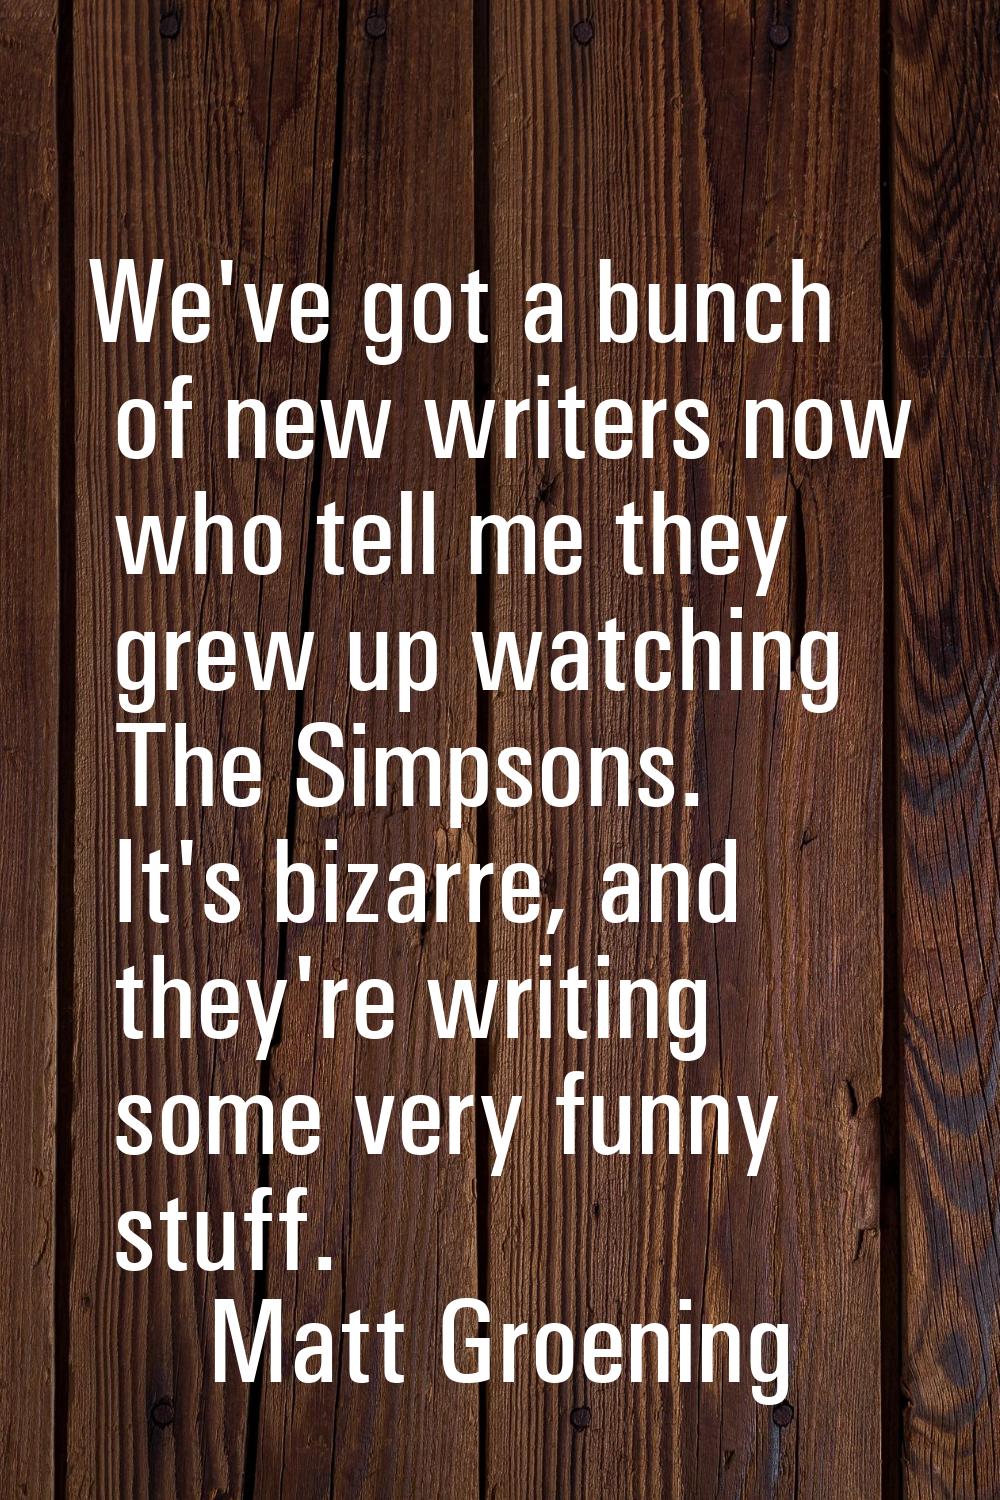 We've got a bunch of new writers now who tell me they grew up watching The Simpsons. It's bizarre, 